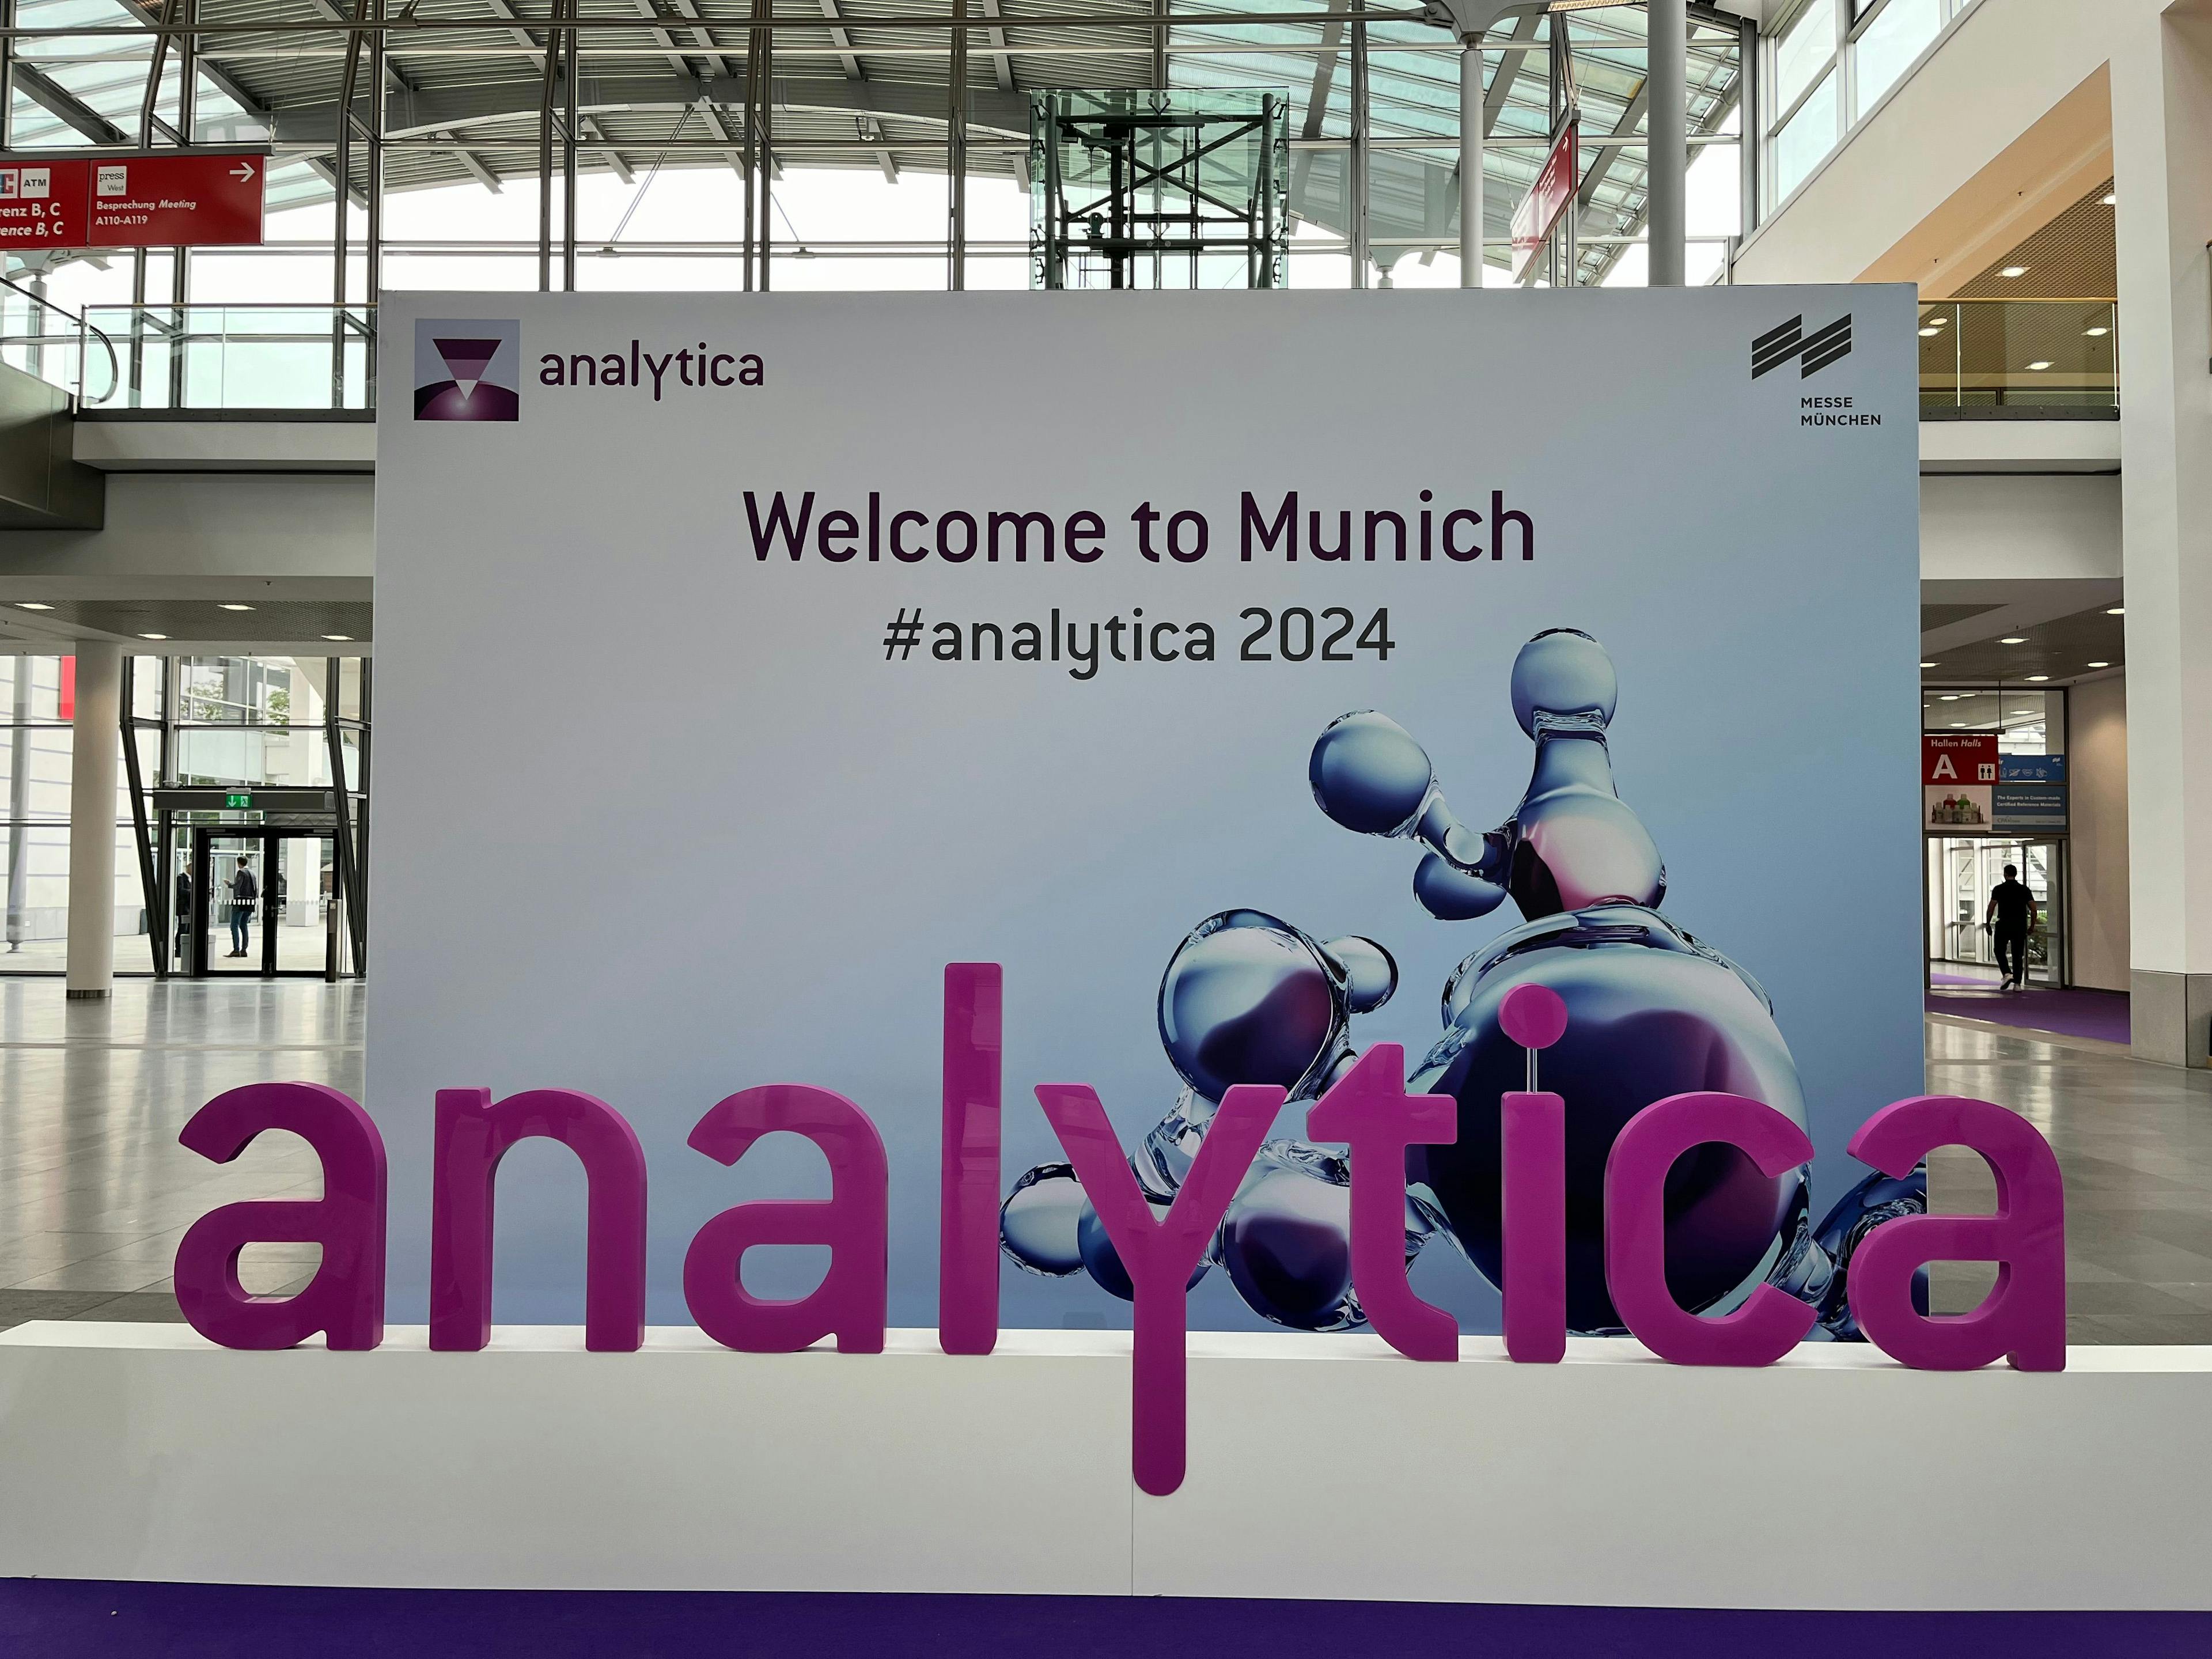 16 New Spectroscopy Products Showcased at Analytica 2024